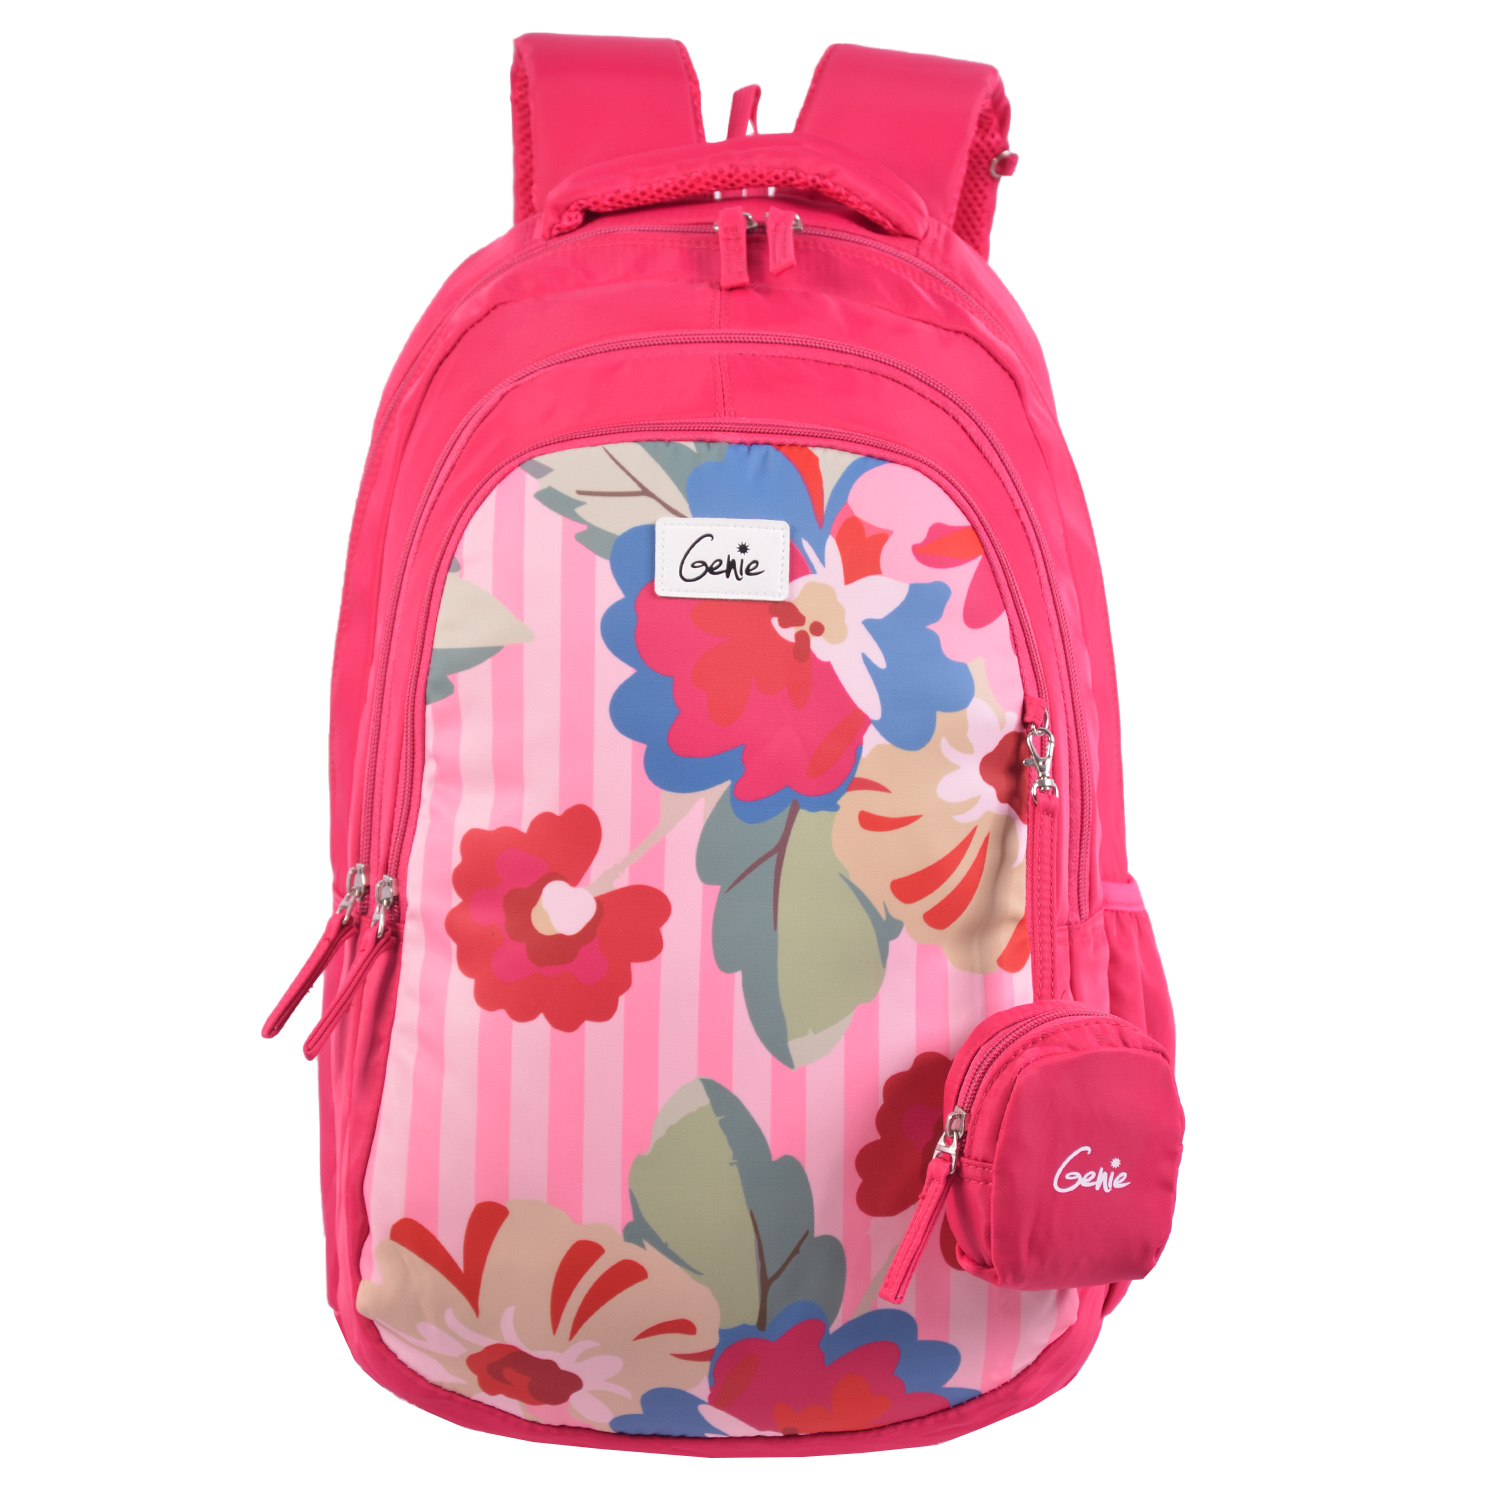 RoshanBags_GENIE 36L BACKPACK LYNDA 19 PINK WITH POUCH